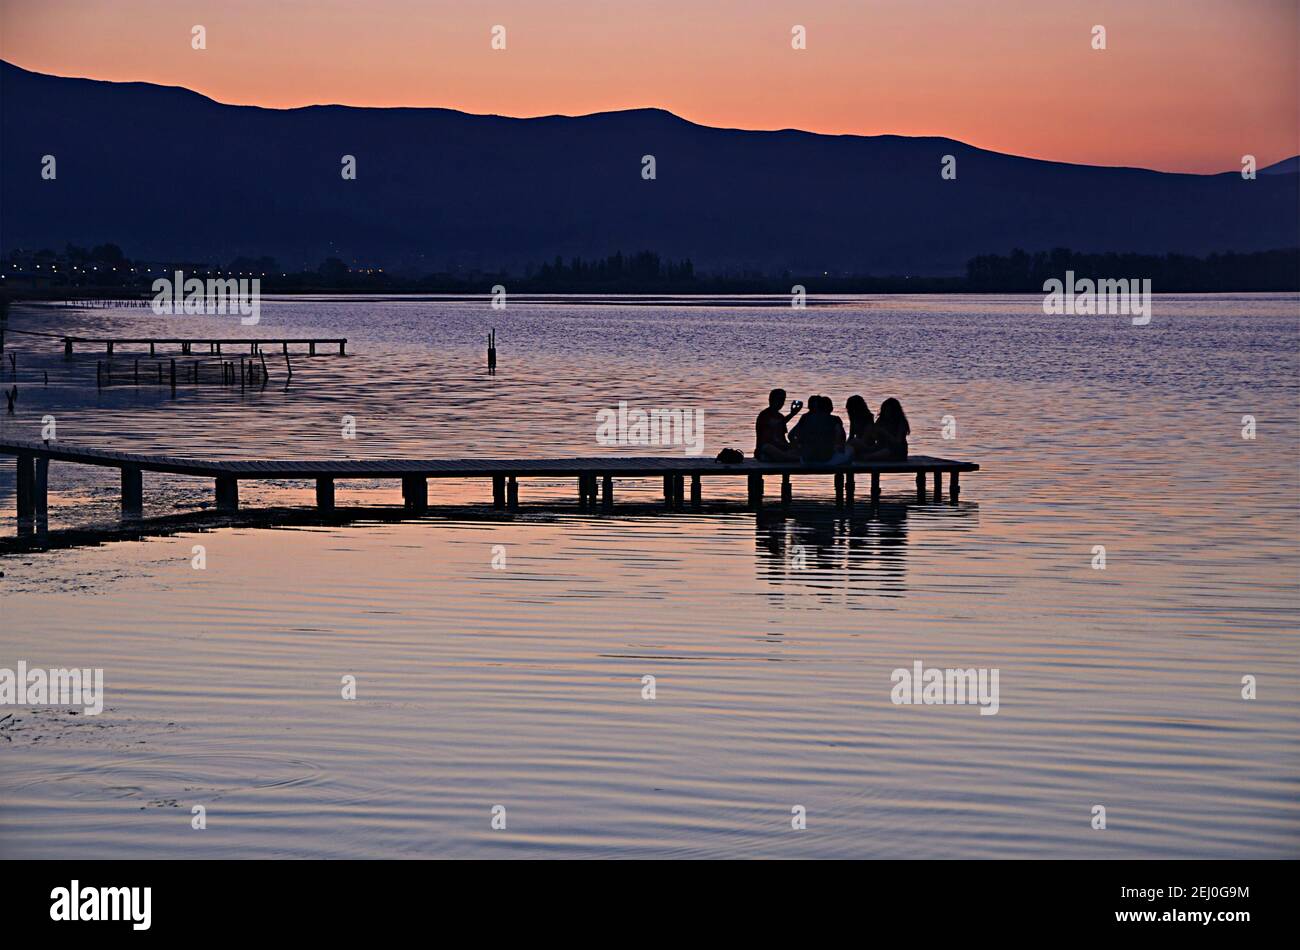 Sunrise landscape with young people silhouettes on the small wooden Pier of Missolonghi Lagoon in Aetolia-Acarnania, Greece. Stock Photo